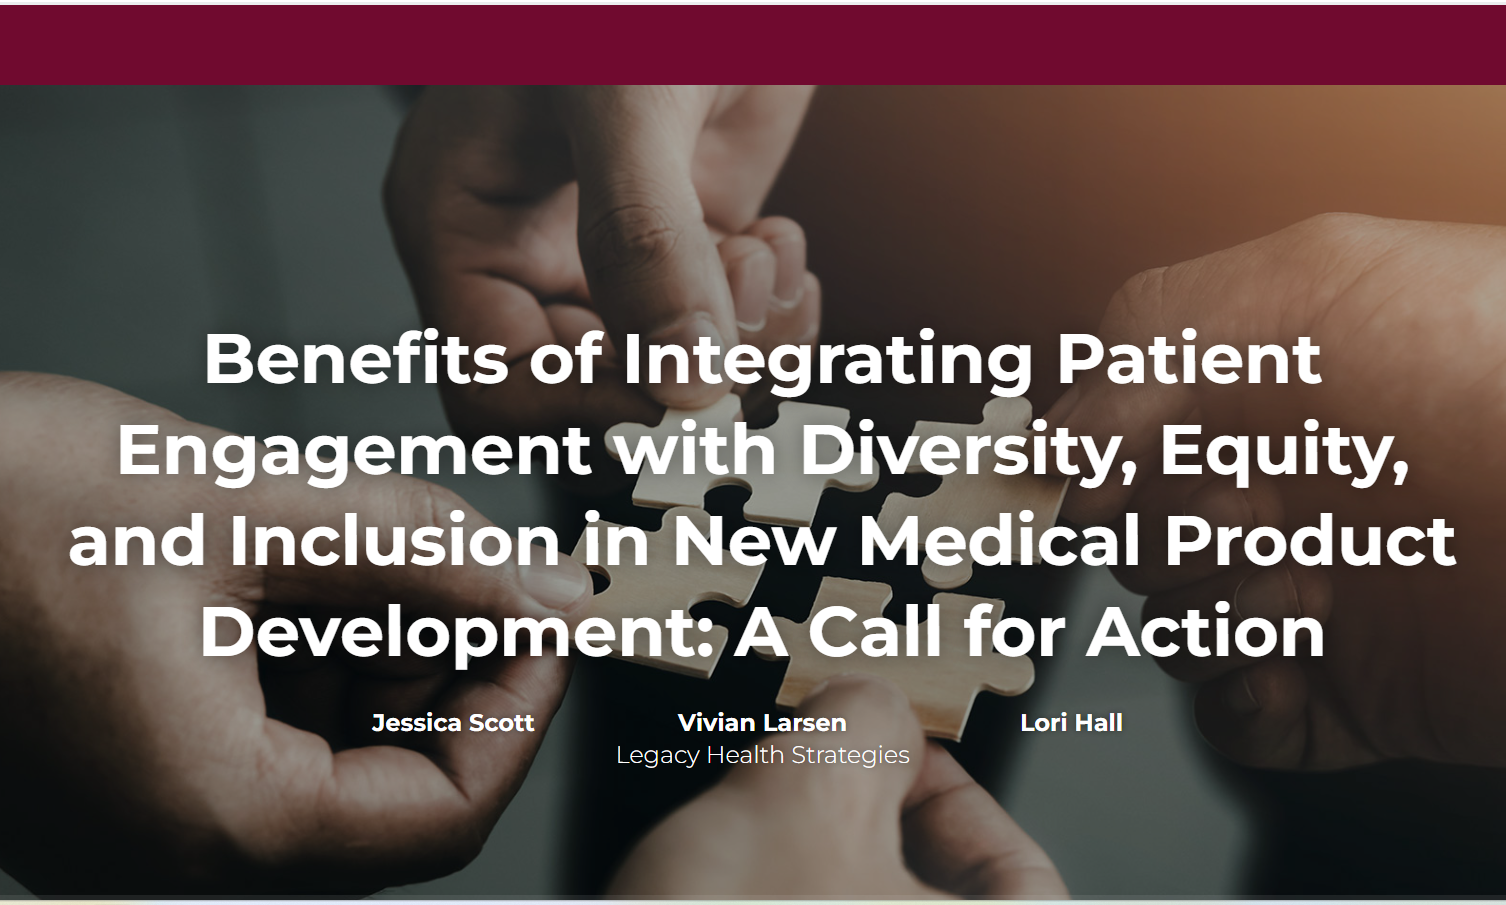 Four hands reaching toward each other, each holding a puzzle piece. Text over the image reads "Benefits of Integrating Engagement with Diversity, Equity, and Inclusion in New Medical Product Development: A Call for Action by Jessica Scott, Vivian Larsen, and Lori Hall from Legacy Health Strategies